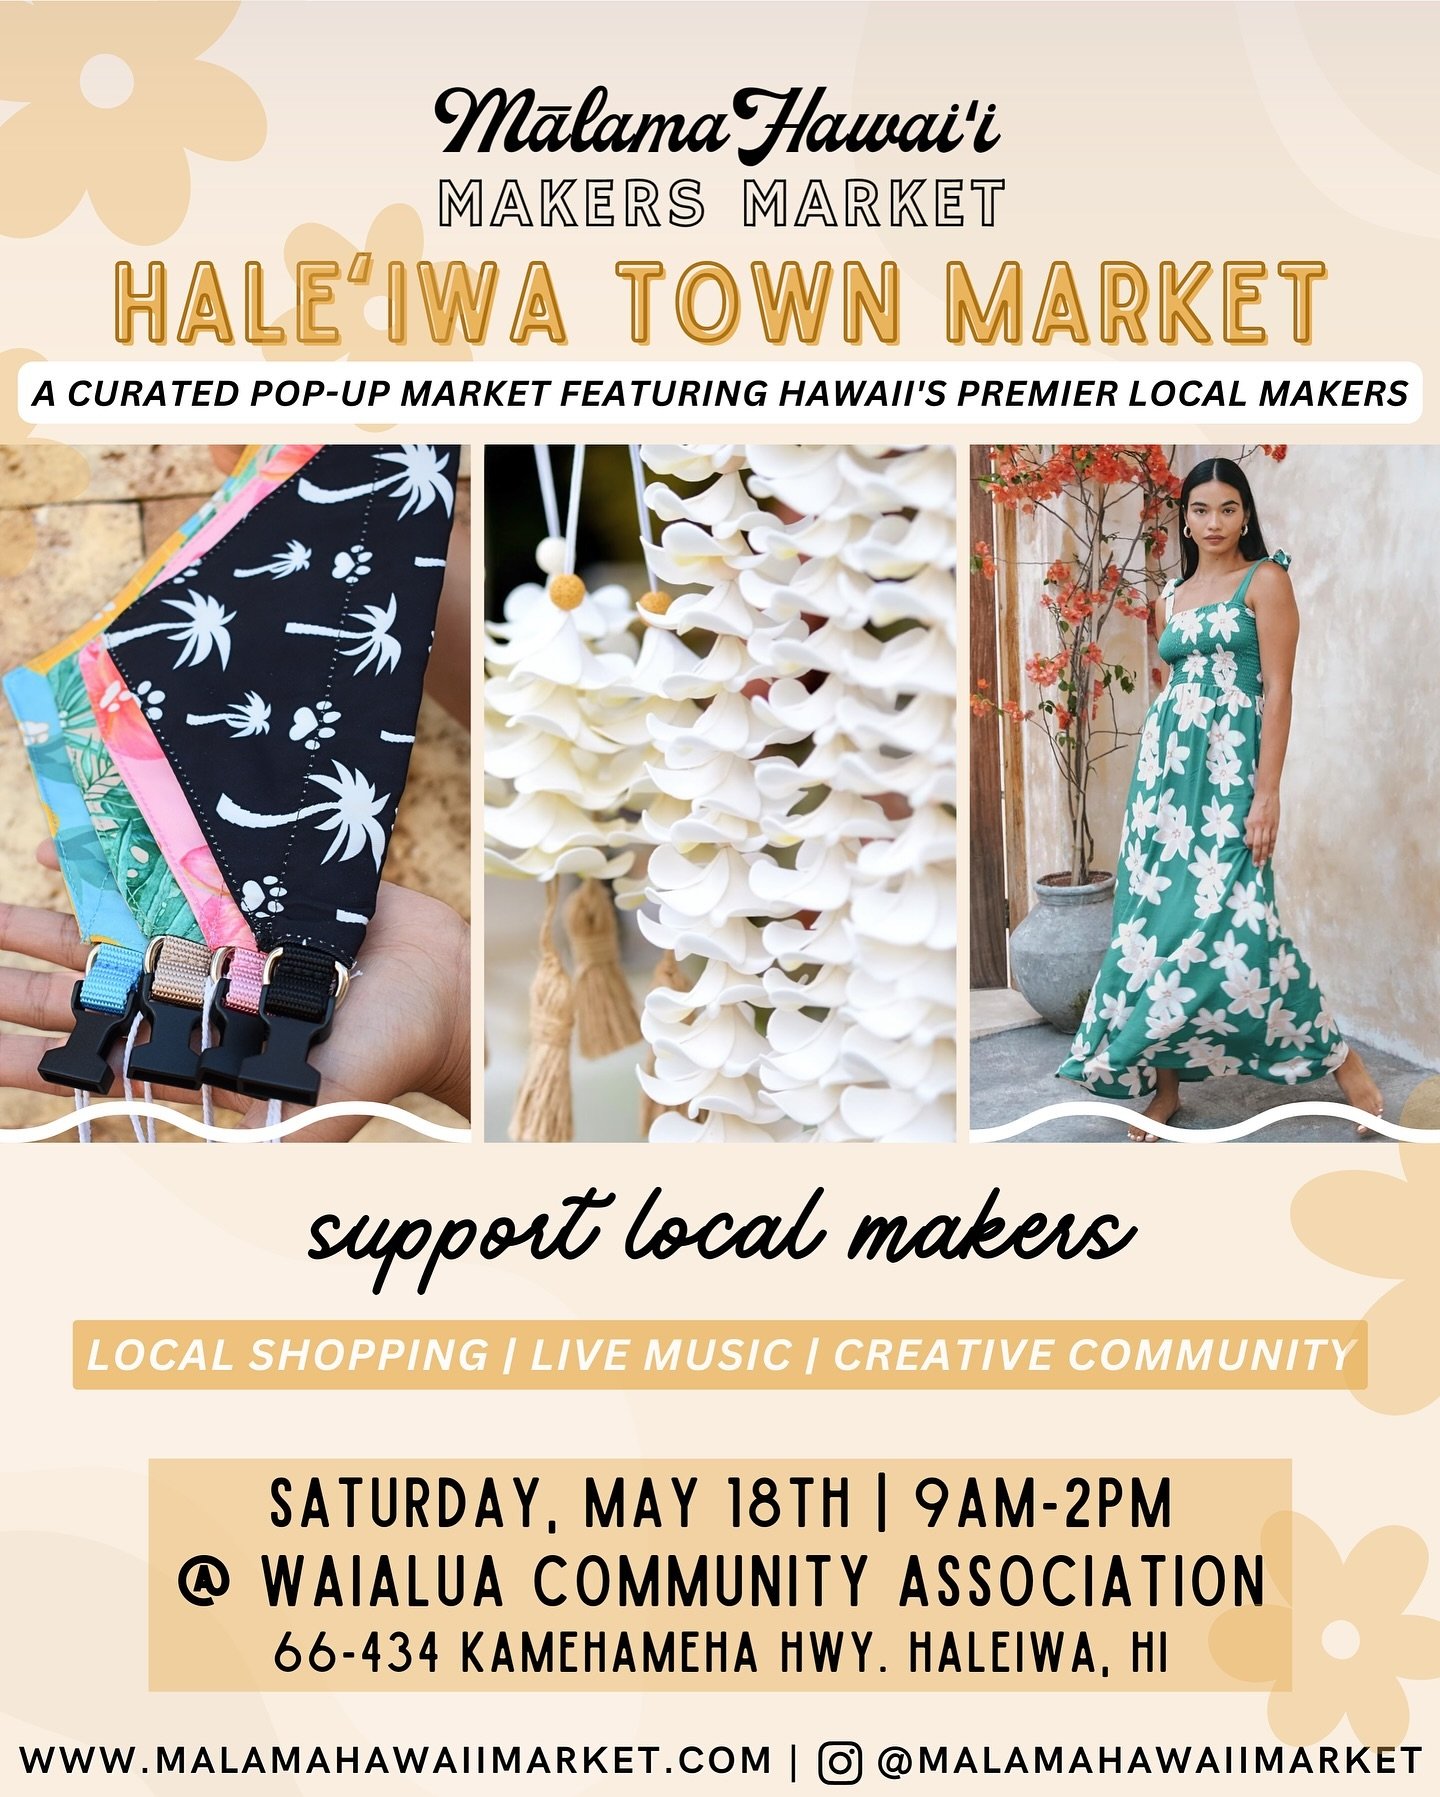 Our Hale&lsquo;iwa Town Market is THIS SATURDAY, May 18th! 💛🌼🐝

Located in the heart of Historic Hale&lsquo;iwa Town 〰️ our curated makers market is the perfect place to spend your Saturday on the North Shore! 🌊🌴

There will be over 40 talented 